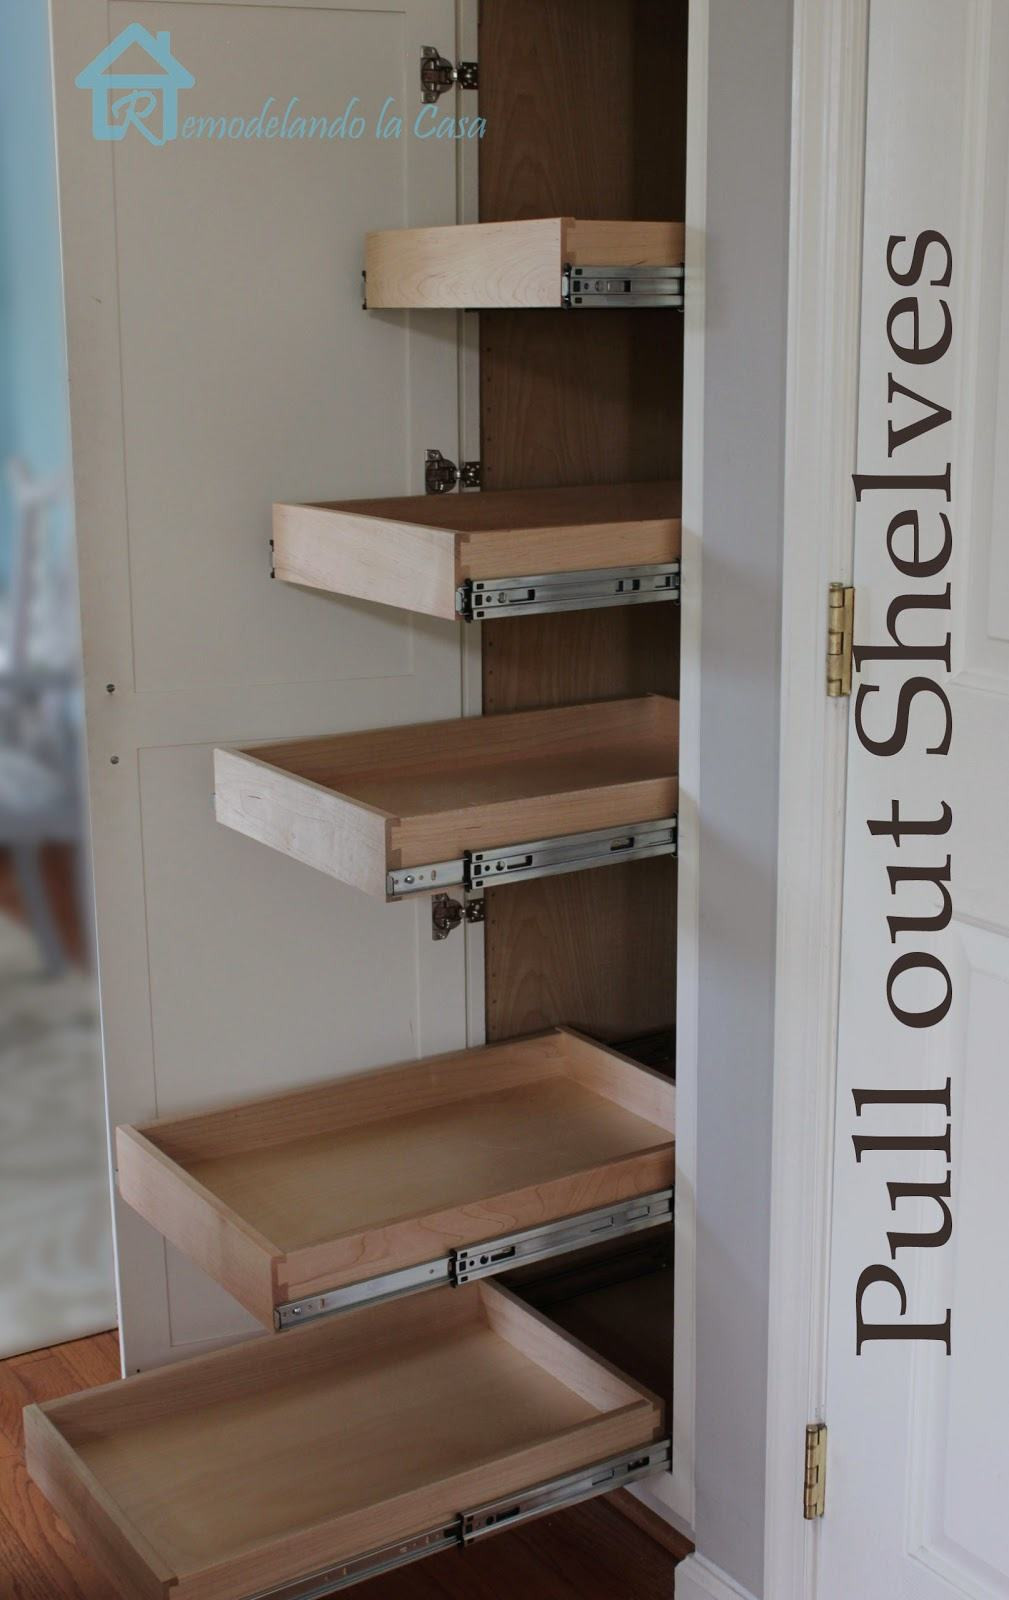 DIY Pull Out Cabinet Organizer
 Cheap Home Improvement Ideas You Can Do With A Hammer and Nail